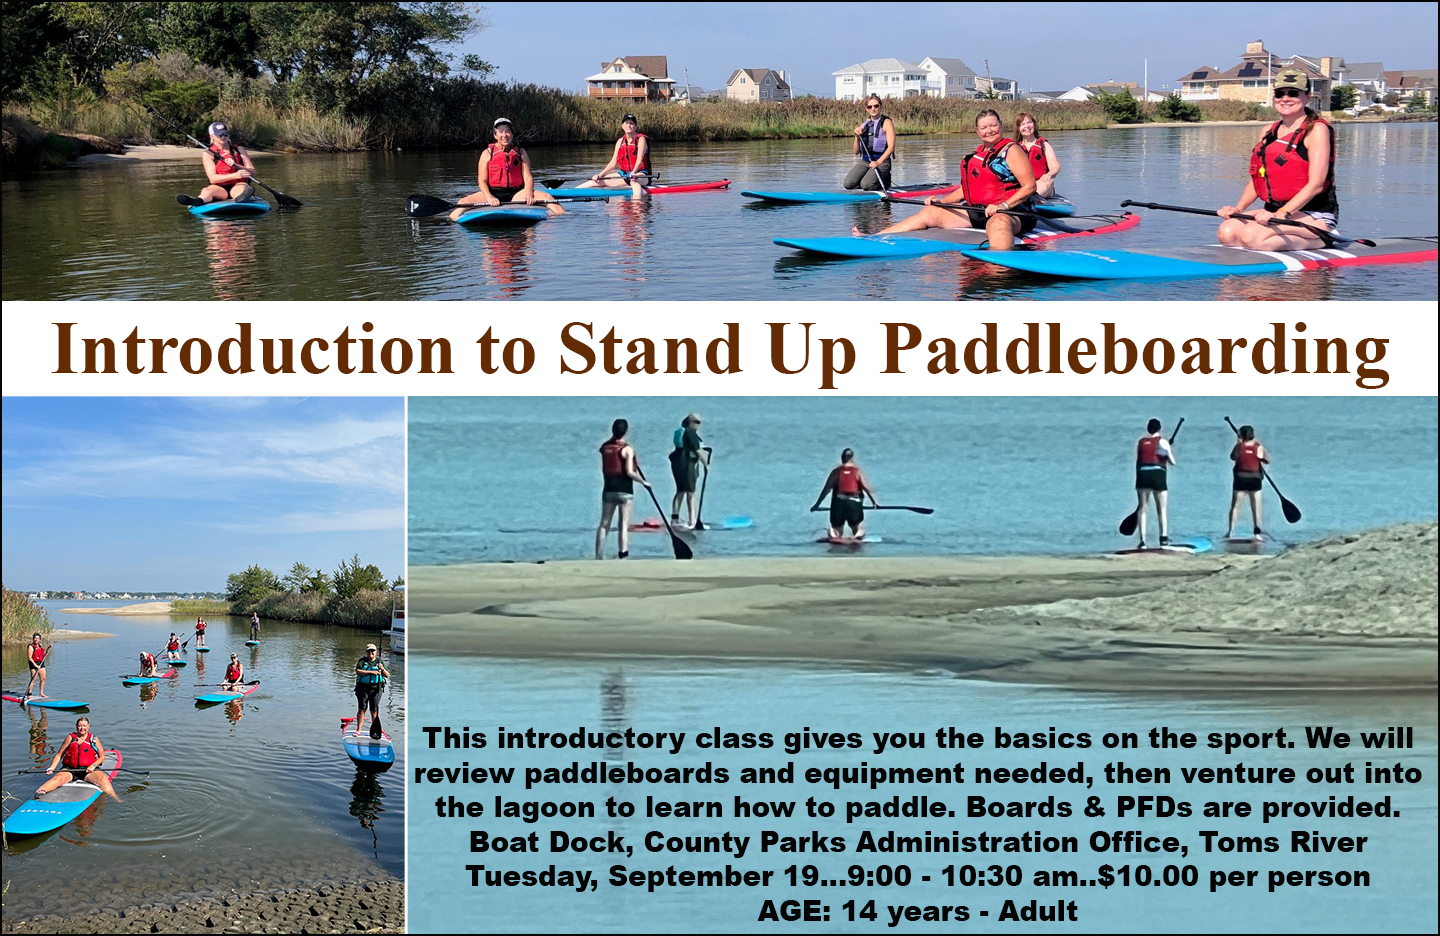 Intro to Paddle boarding